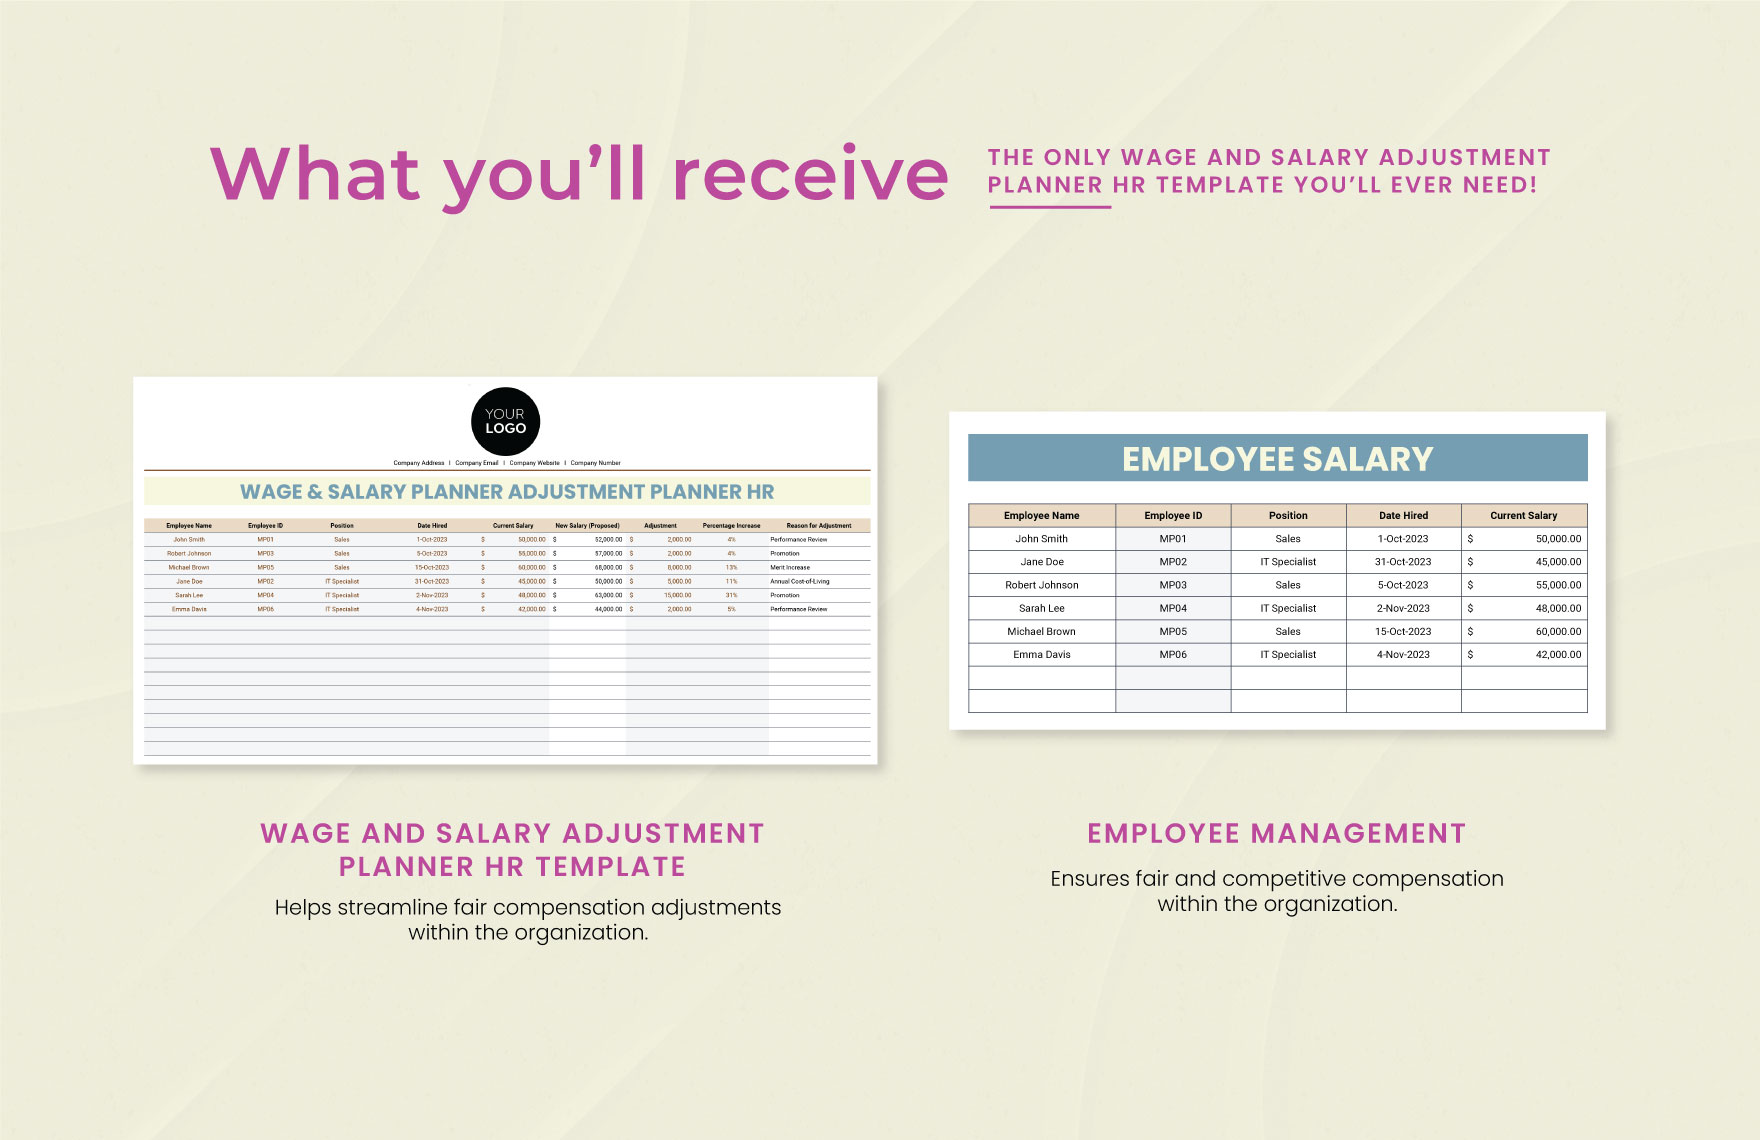 Wage and Salary Adjustment Planner HR Template